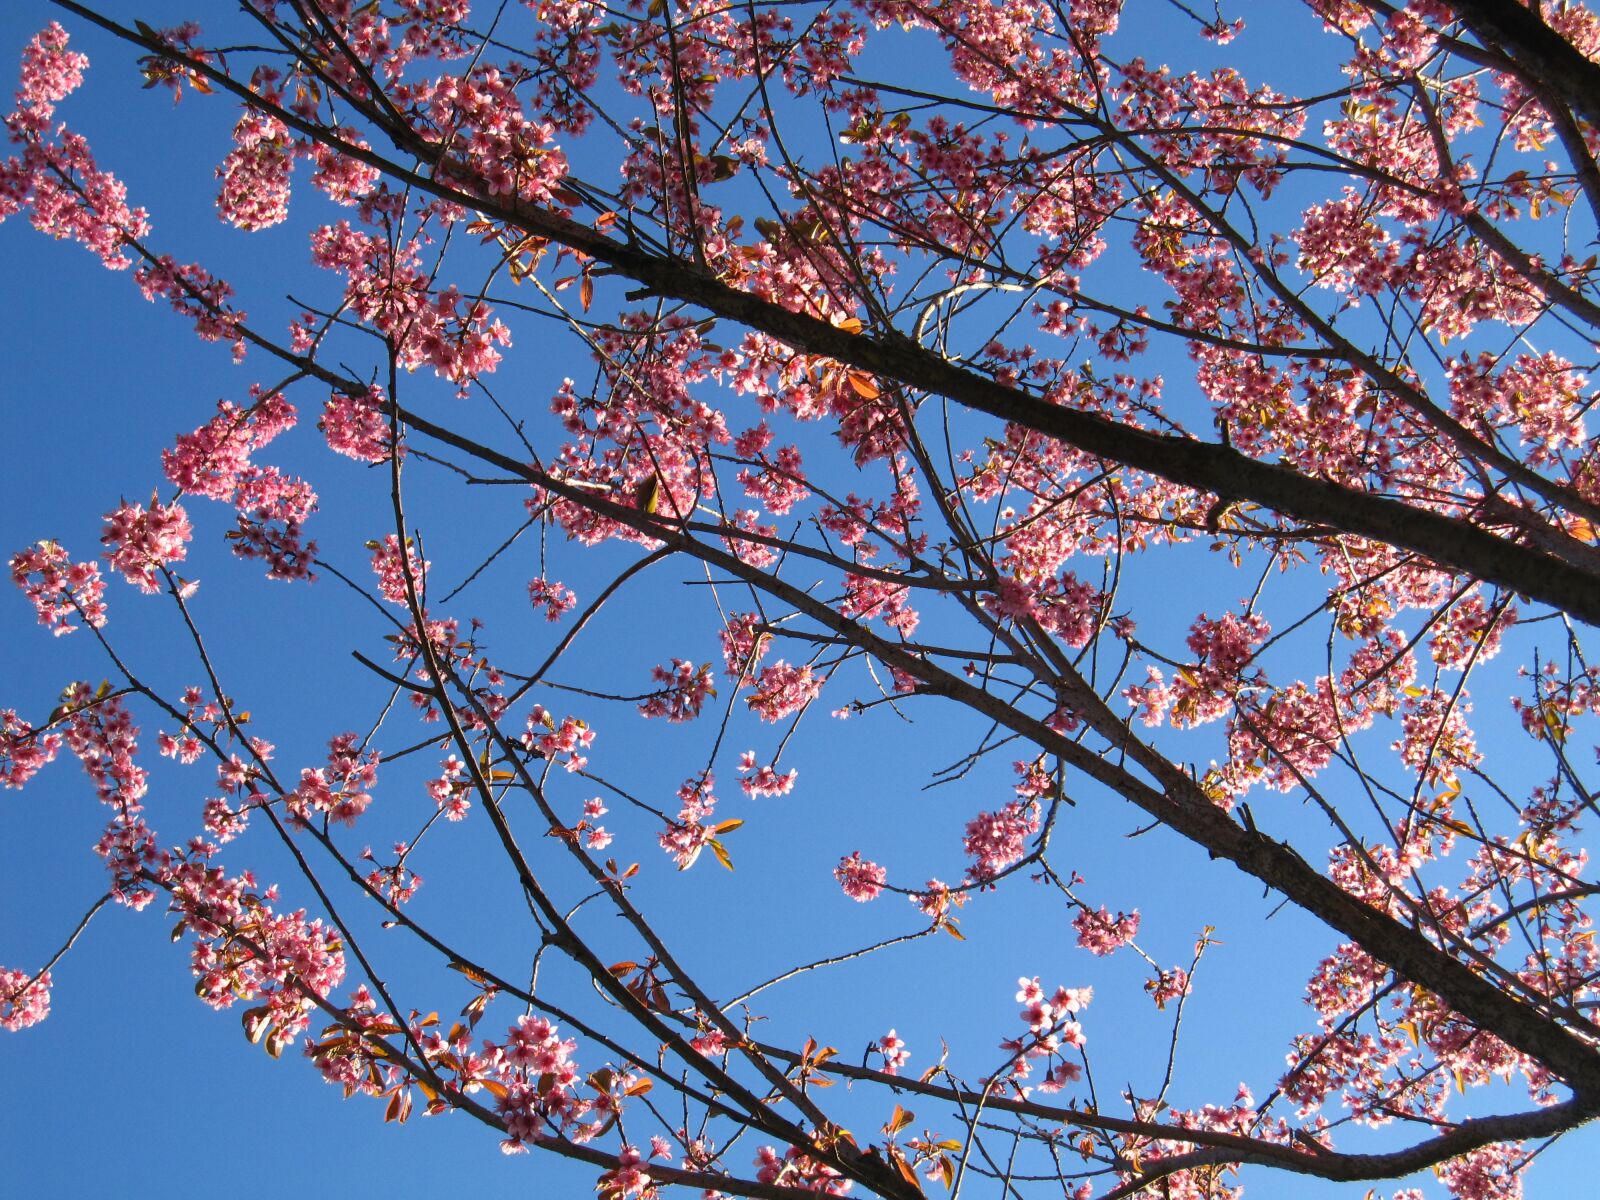 Canon PowerShot SD960 IS (Digital IXUS 110 IS / IXY Digital 510 IS) sample photo. Spring, cherry blossom, nature photography